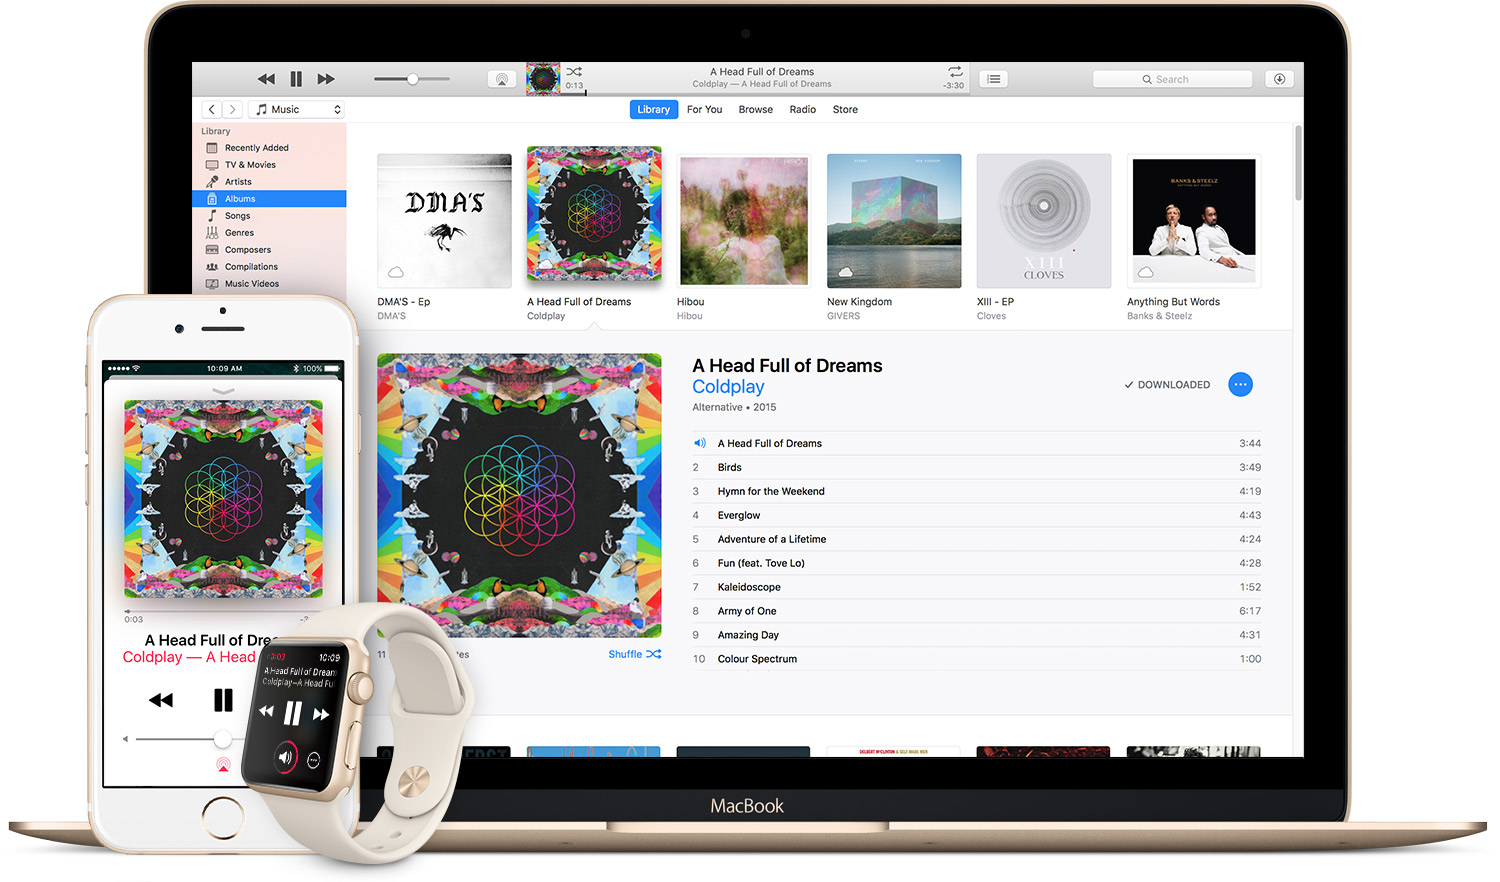 How to get 12 months of Apple Music for the price of 10